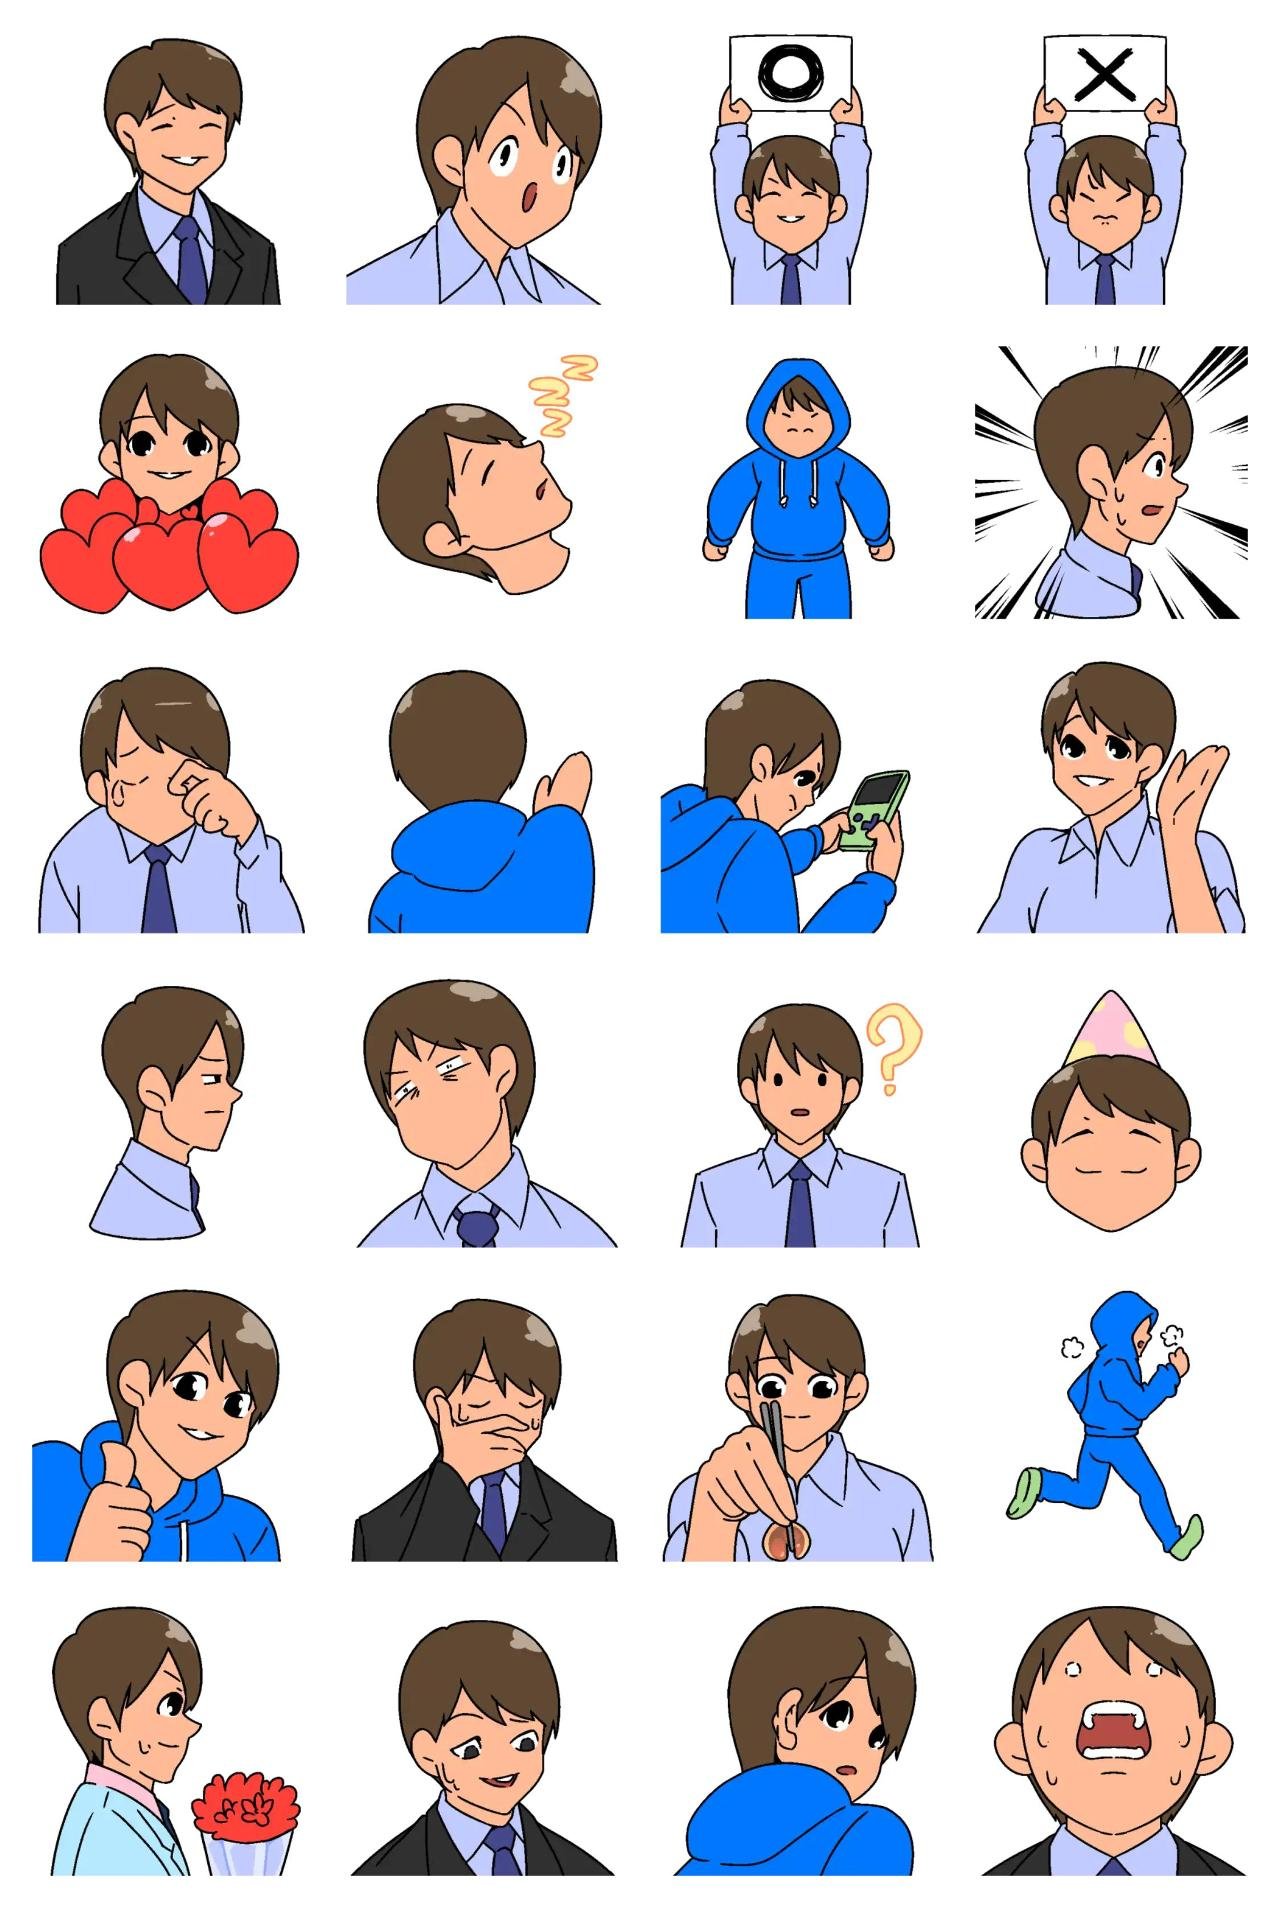 A boy's reactions Animation/Cartoon,People sticker pack for Whatsapp, Telegram, Signal, and others chatting and message apps